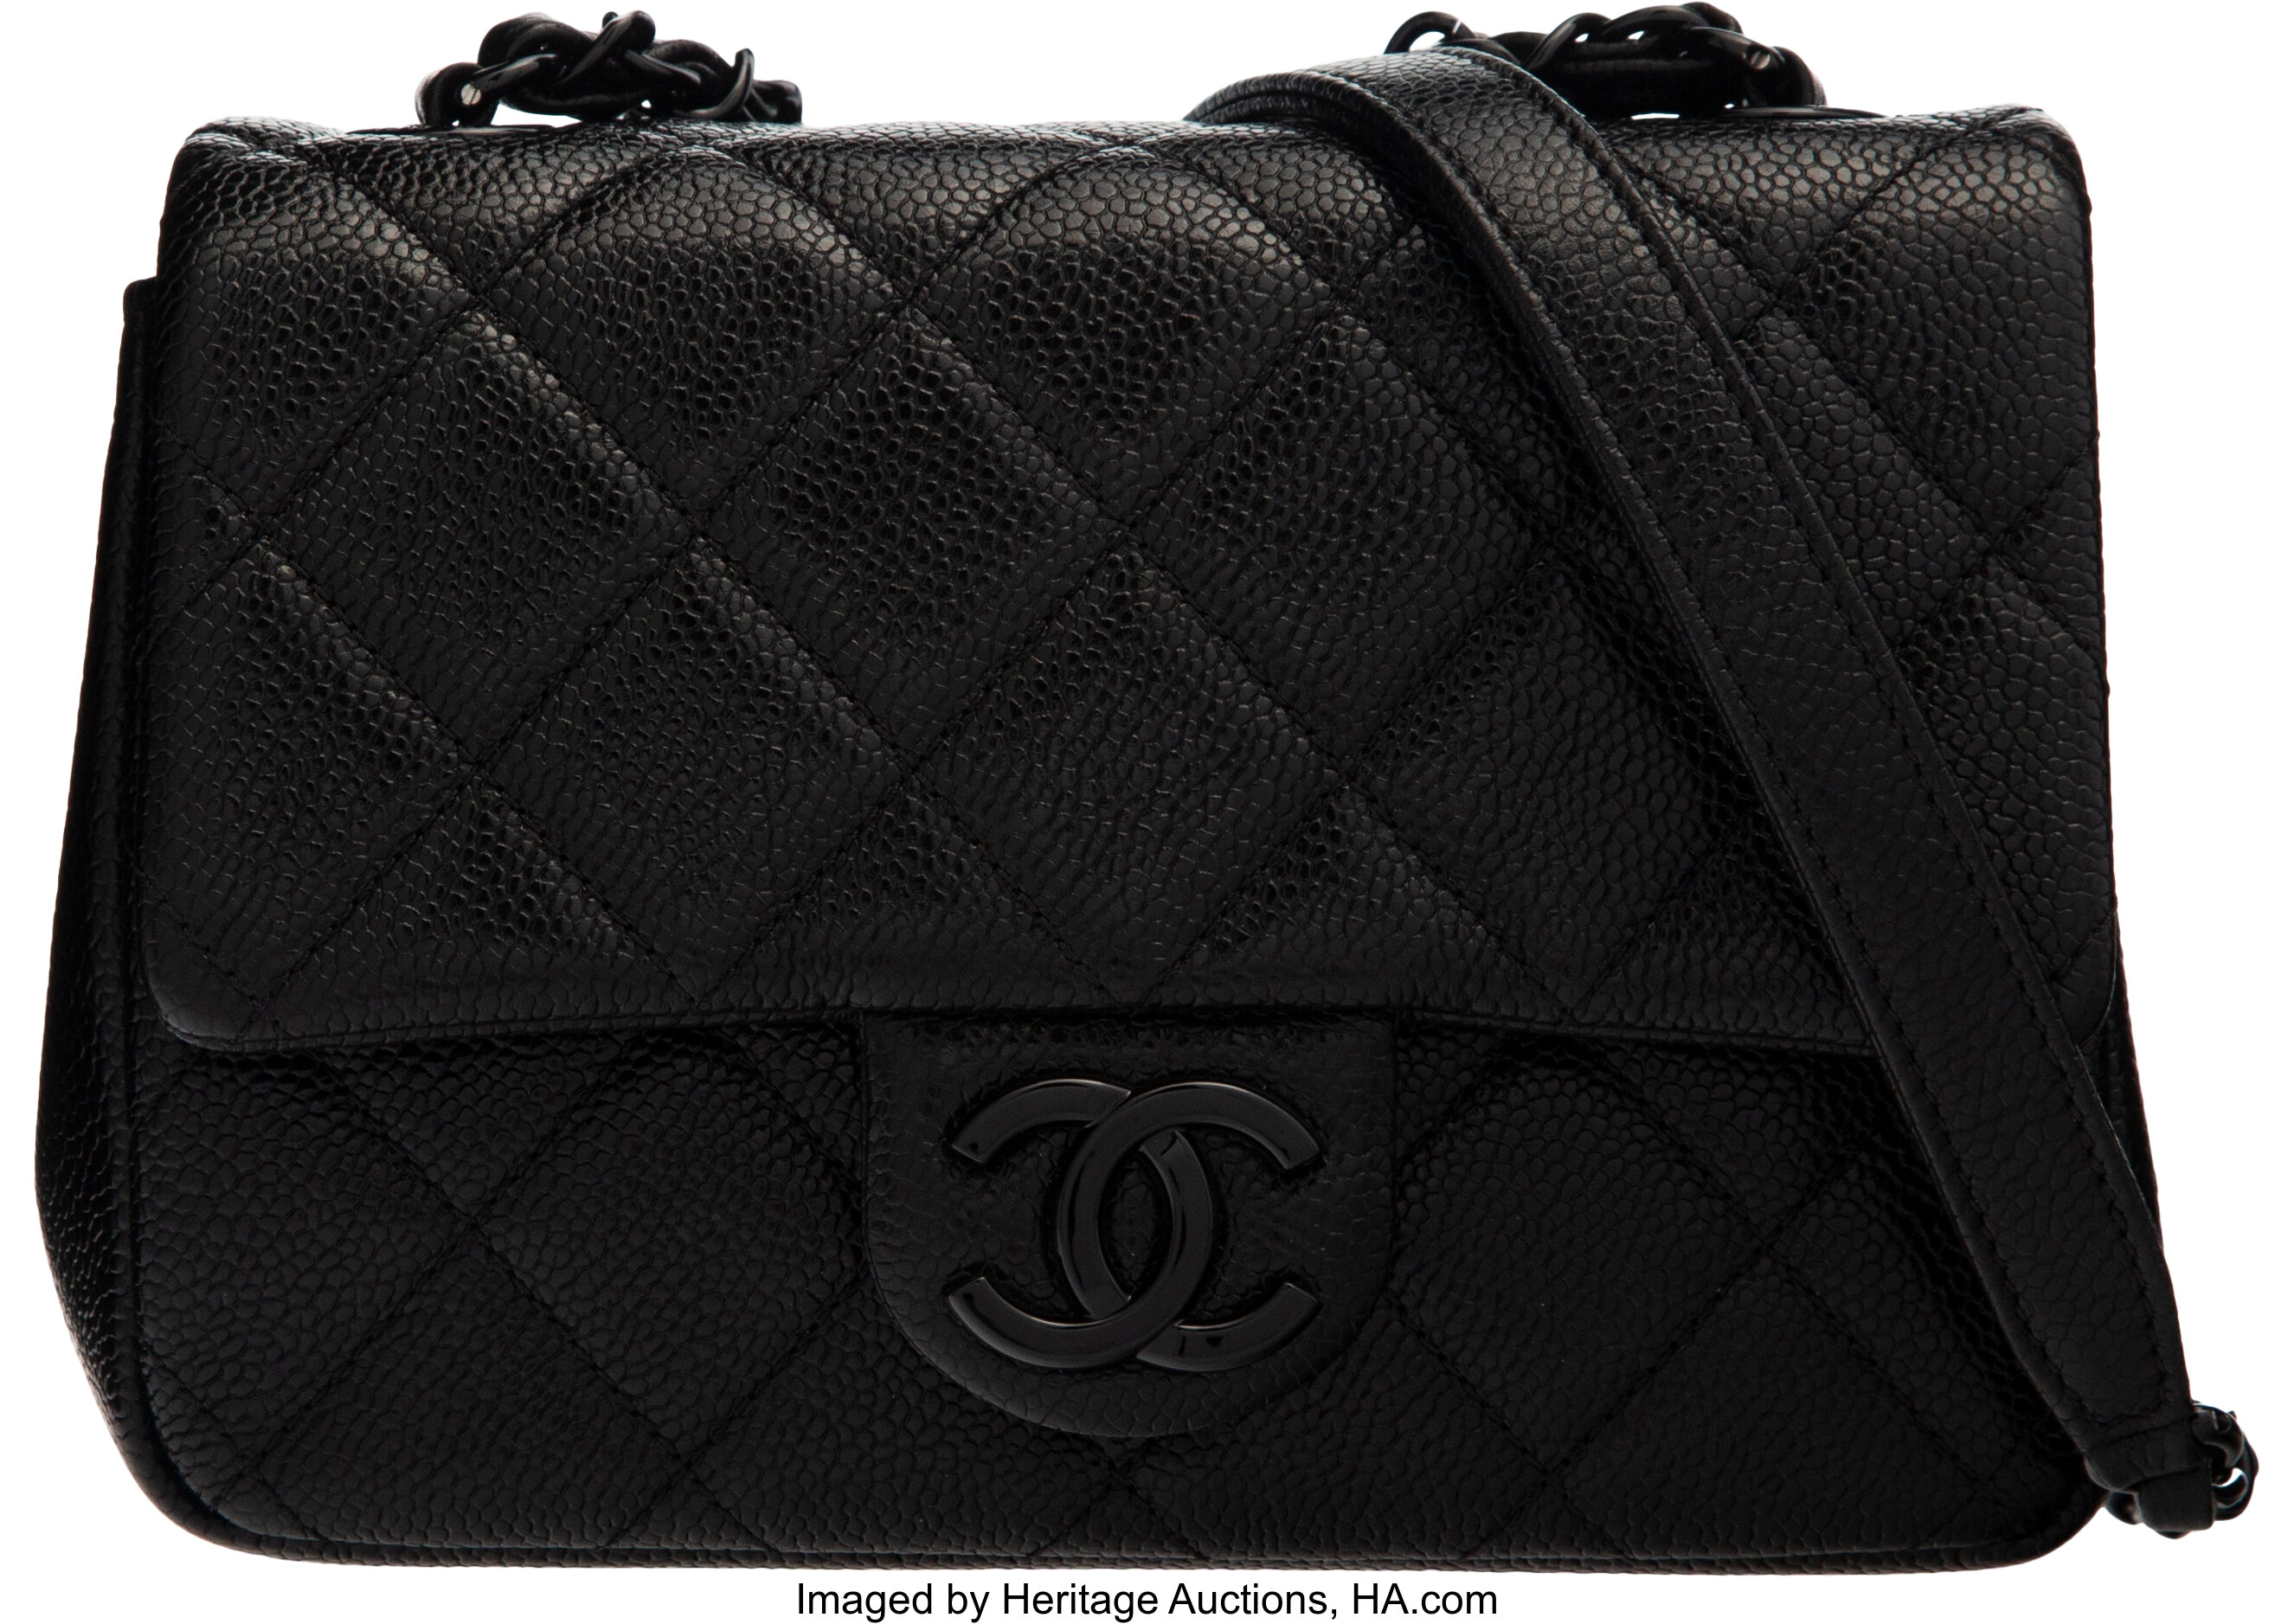 Chanel So Black Quilted Caviar Leather Mini Flap Bag. Condition: 1